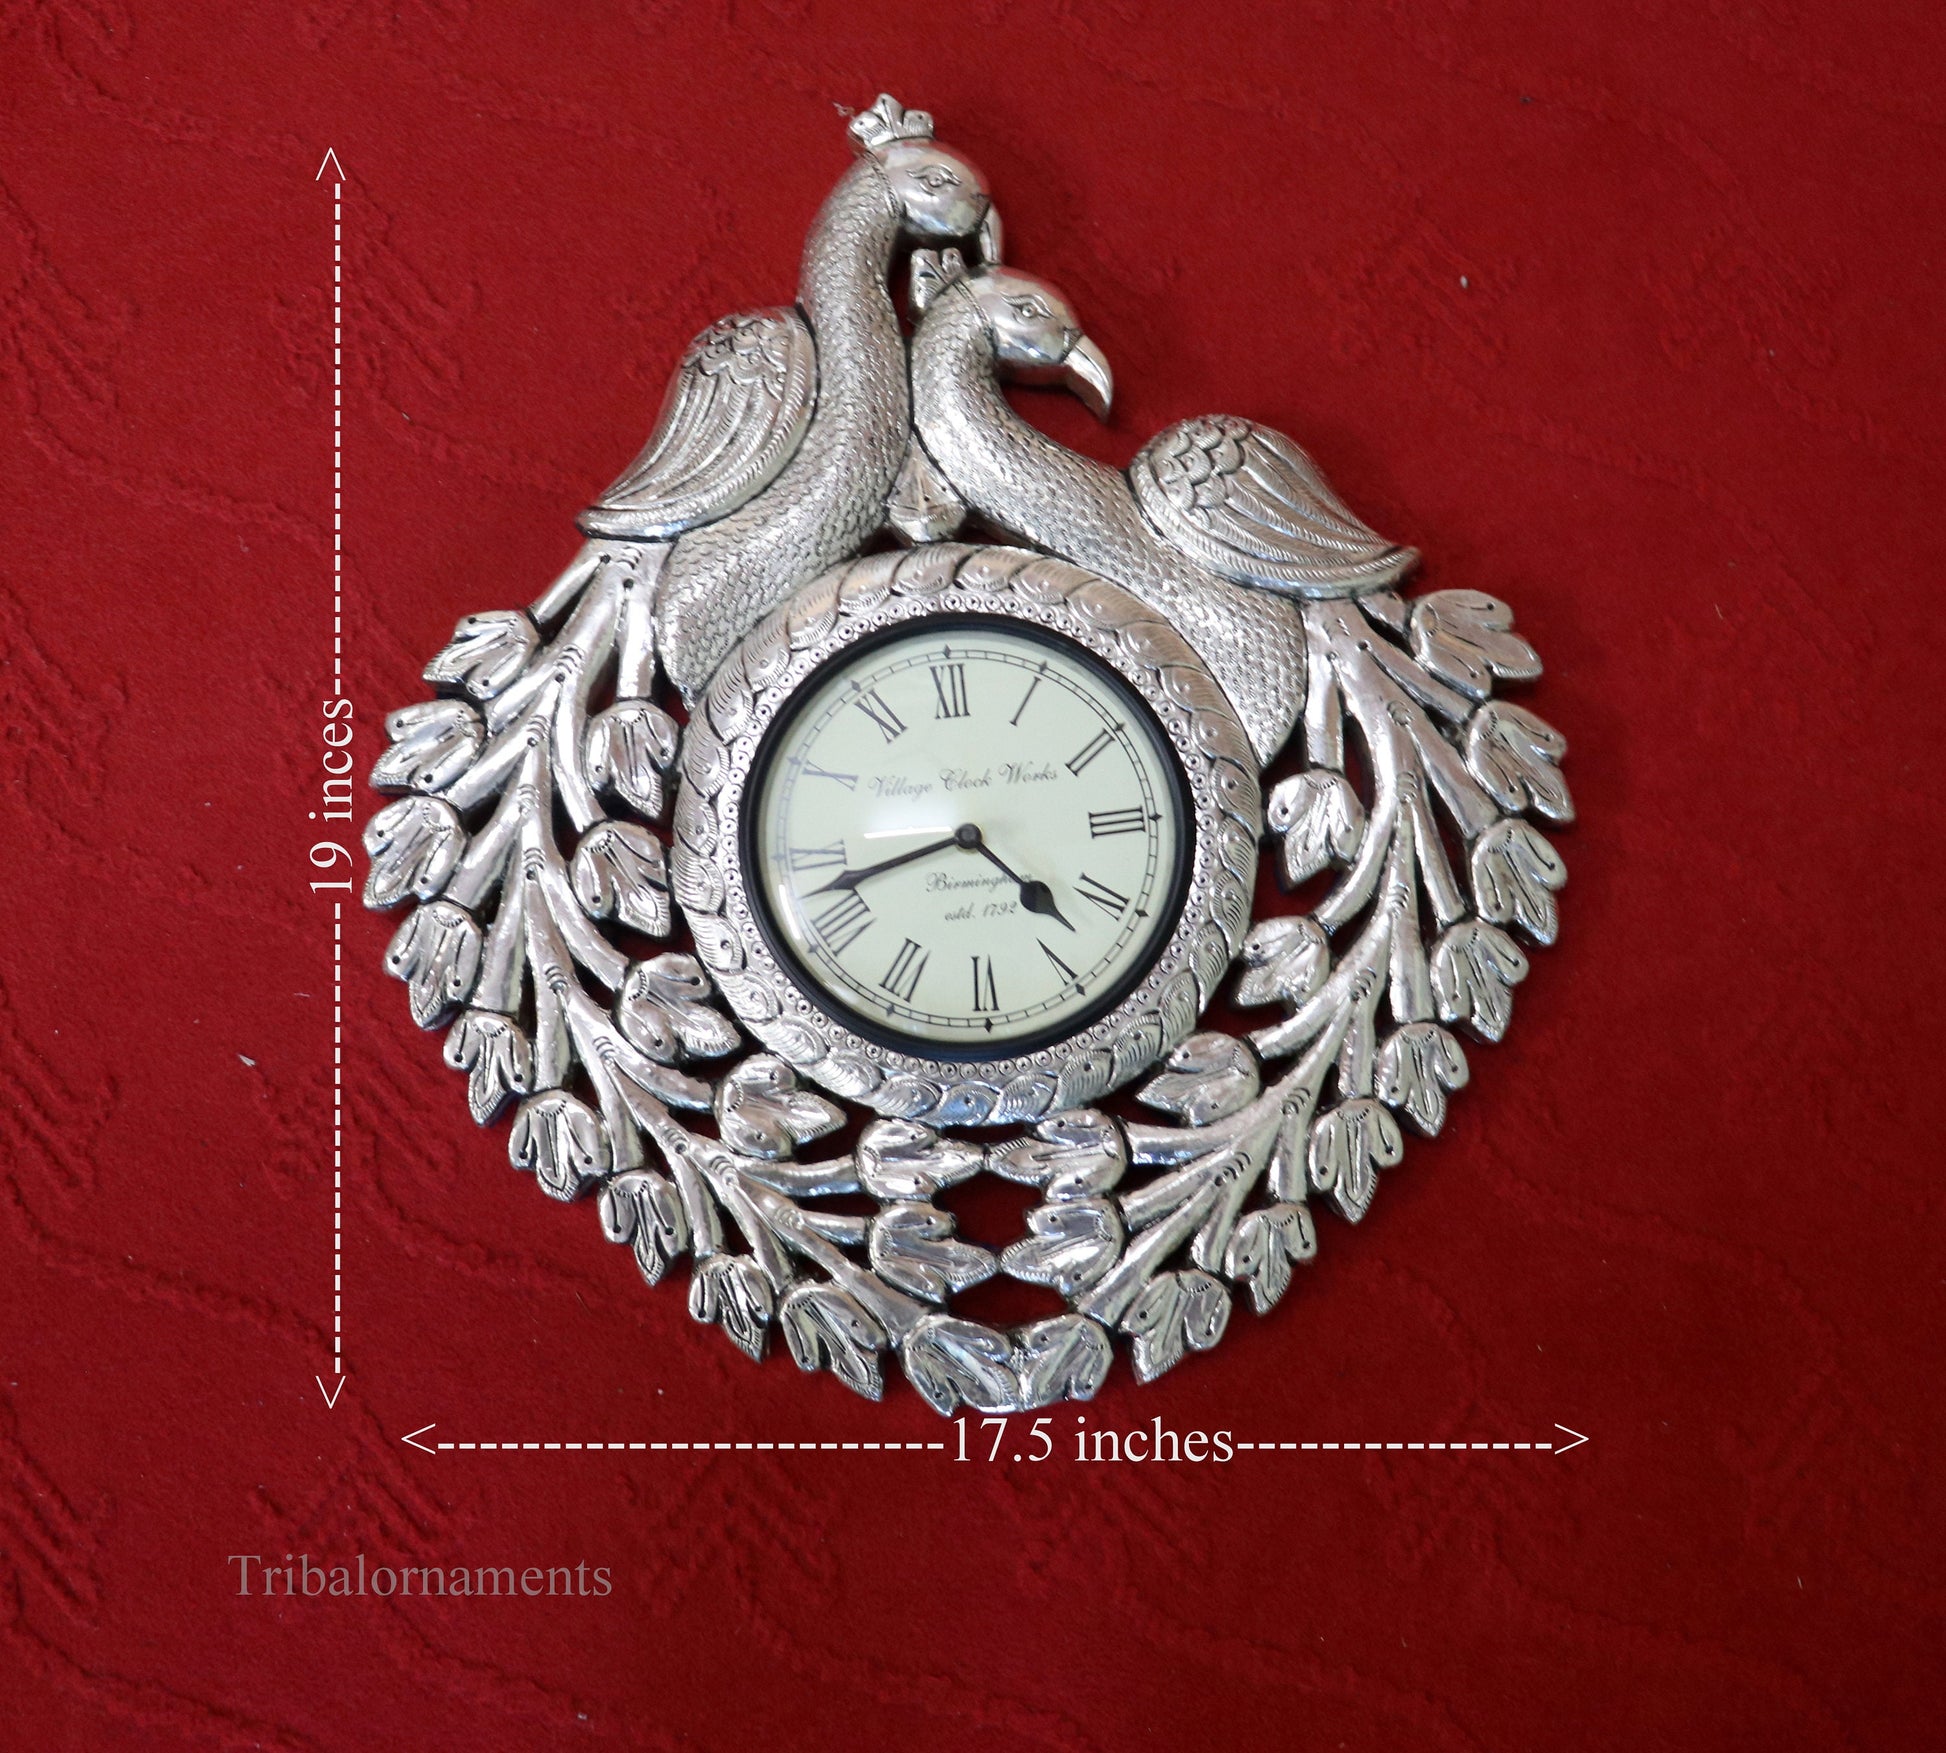 Vintage antique design handmade 999 pure silver peacock design big Size wall clock, wooden base pure silver watch Royal Jewel sf06 - TRIBAL ORNAMENTS